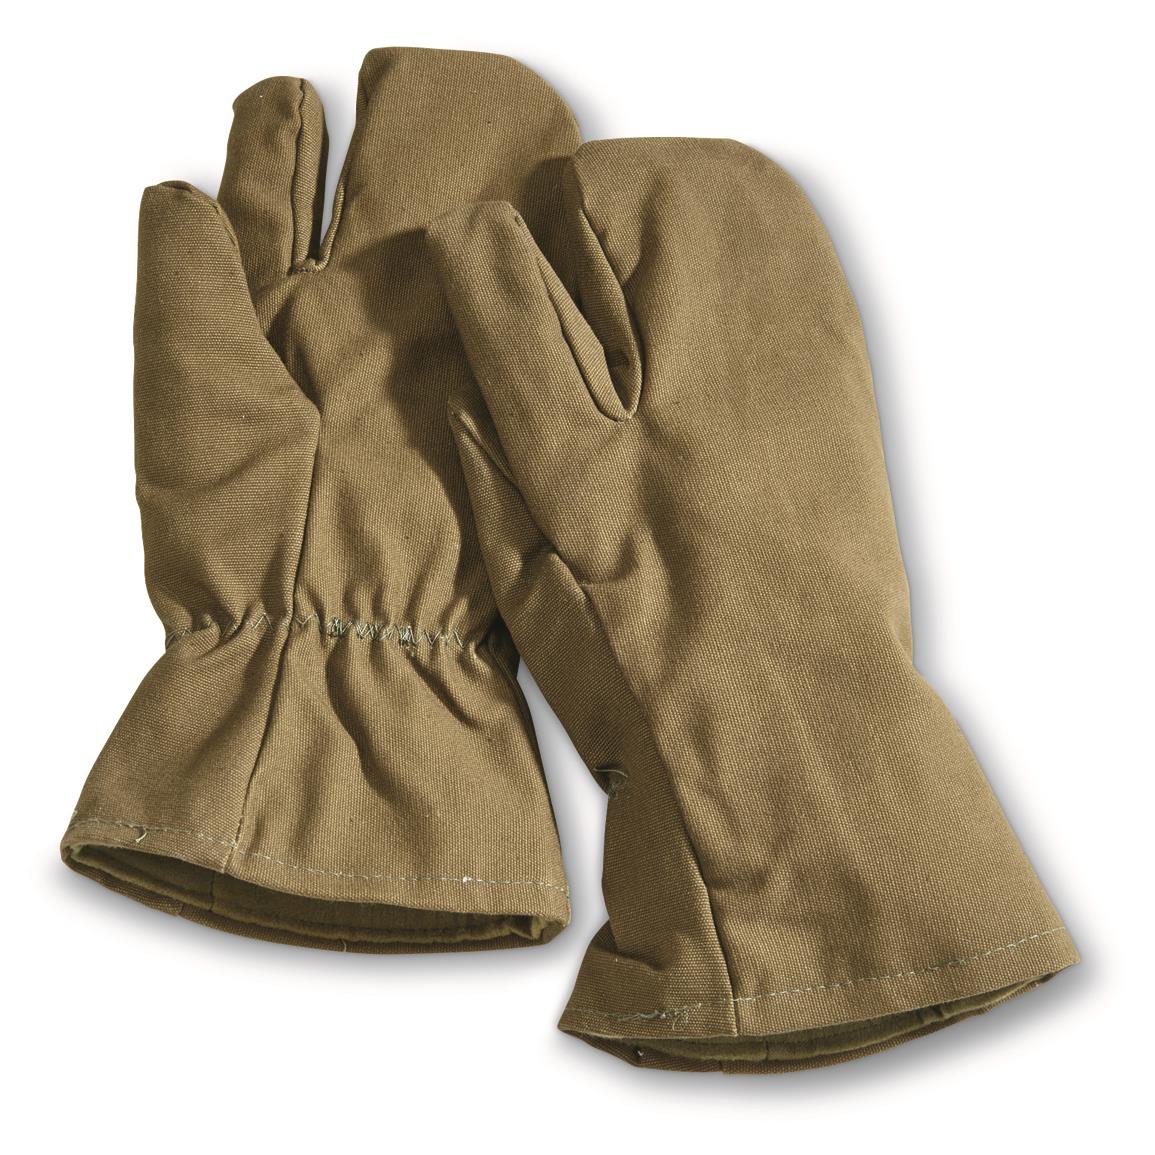 Austrian Military Surplus Shooters Mittens, Used, Olive Drab